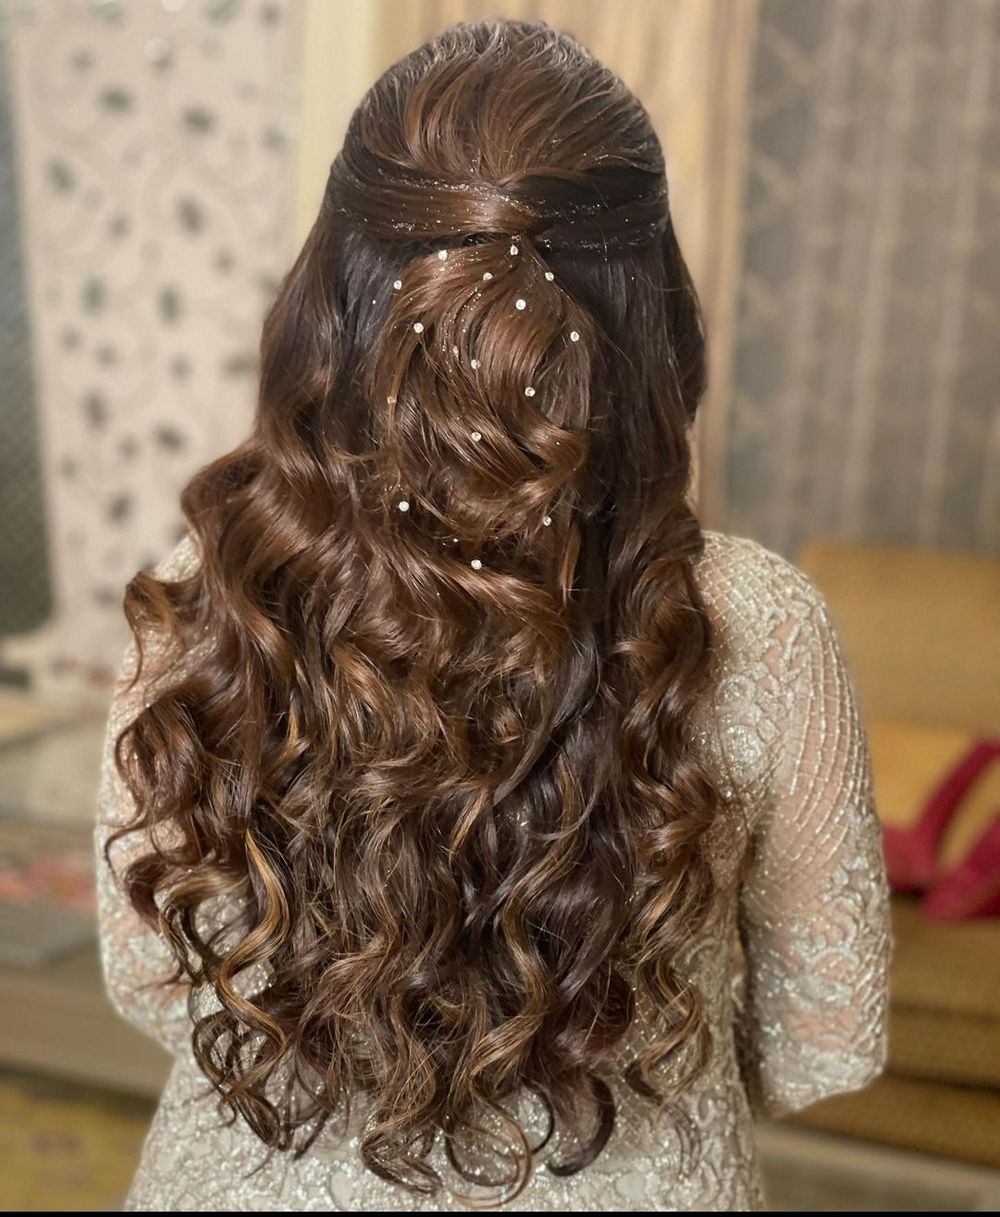 Photo From Hairstyle - By Behold Beauty Bride